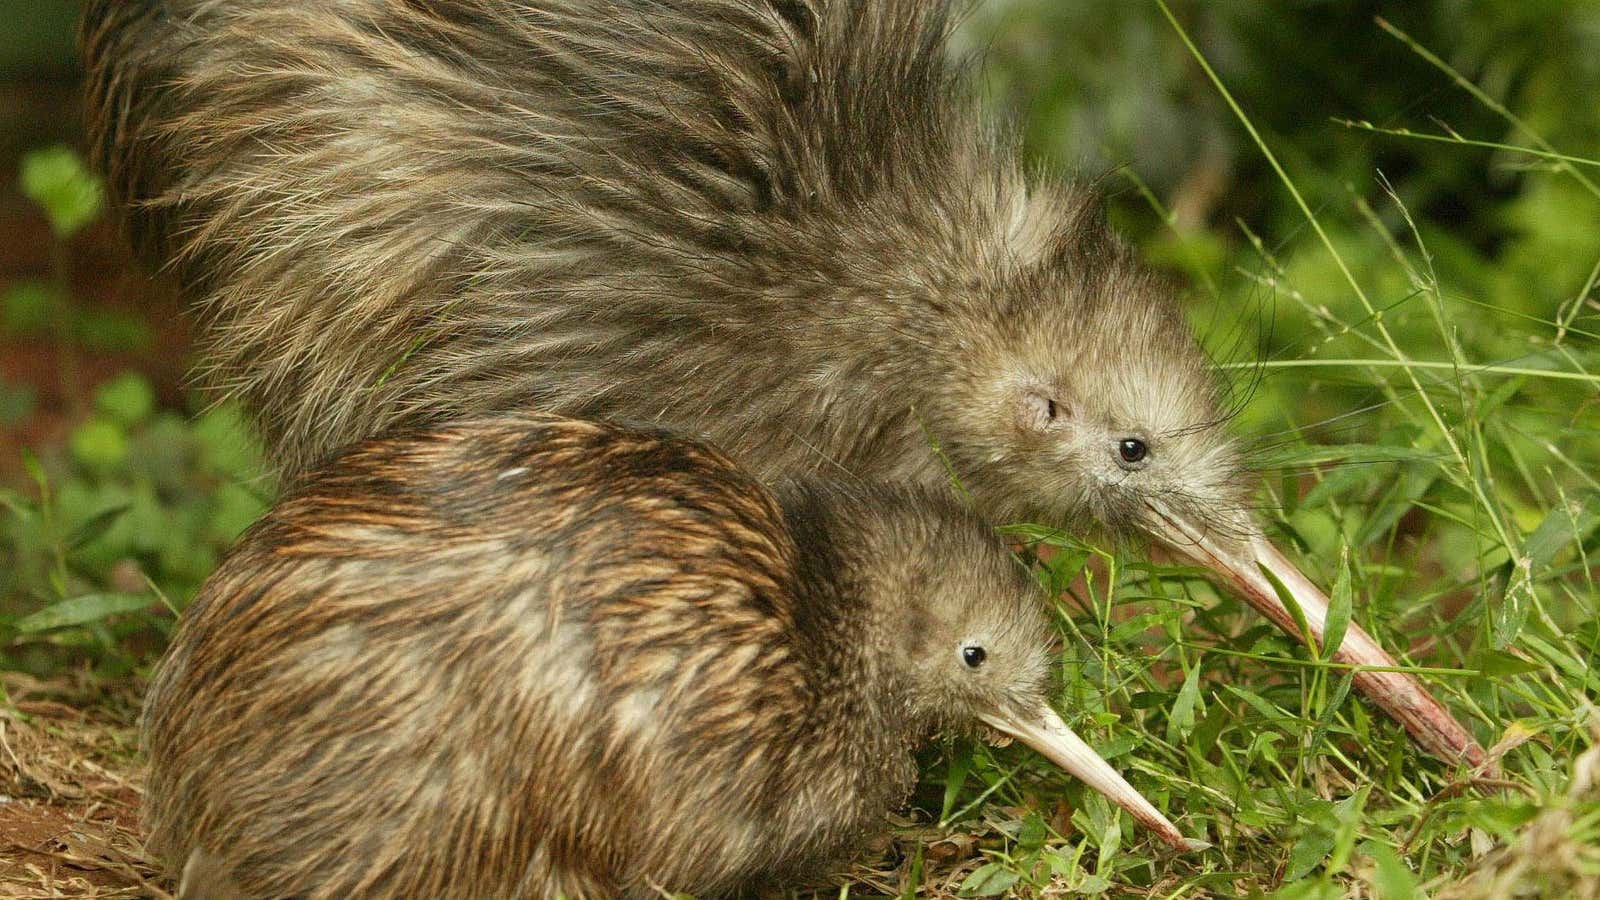 These cute little kiwis are getting gobbled up by invasive mammals.